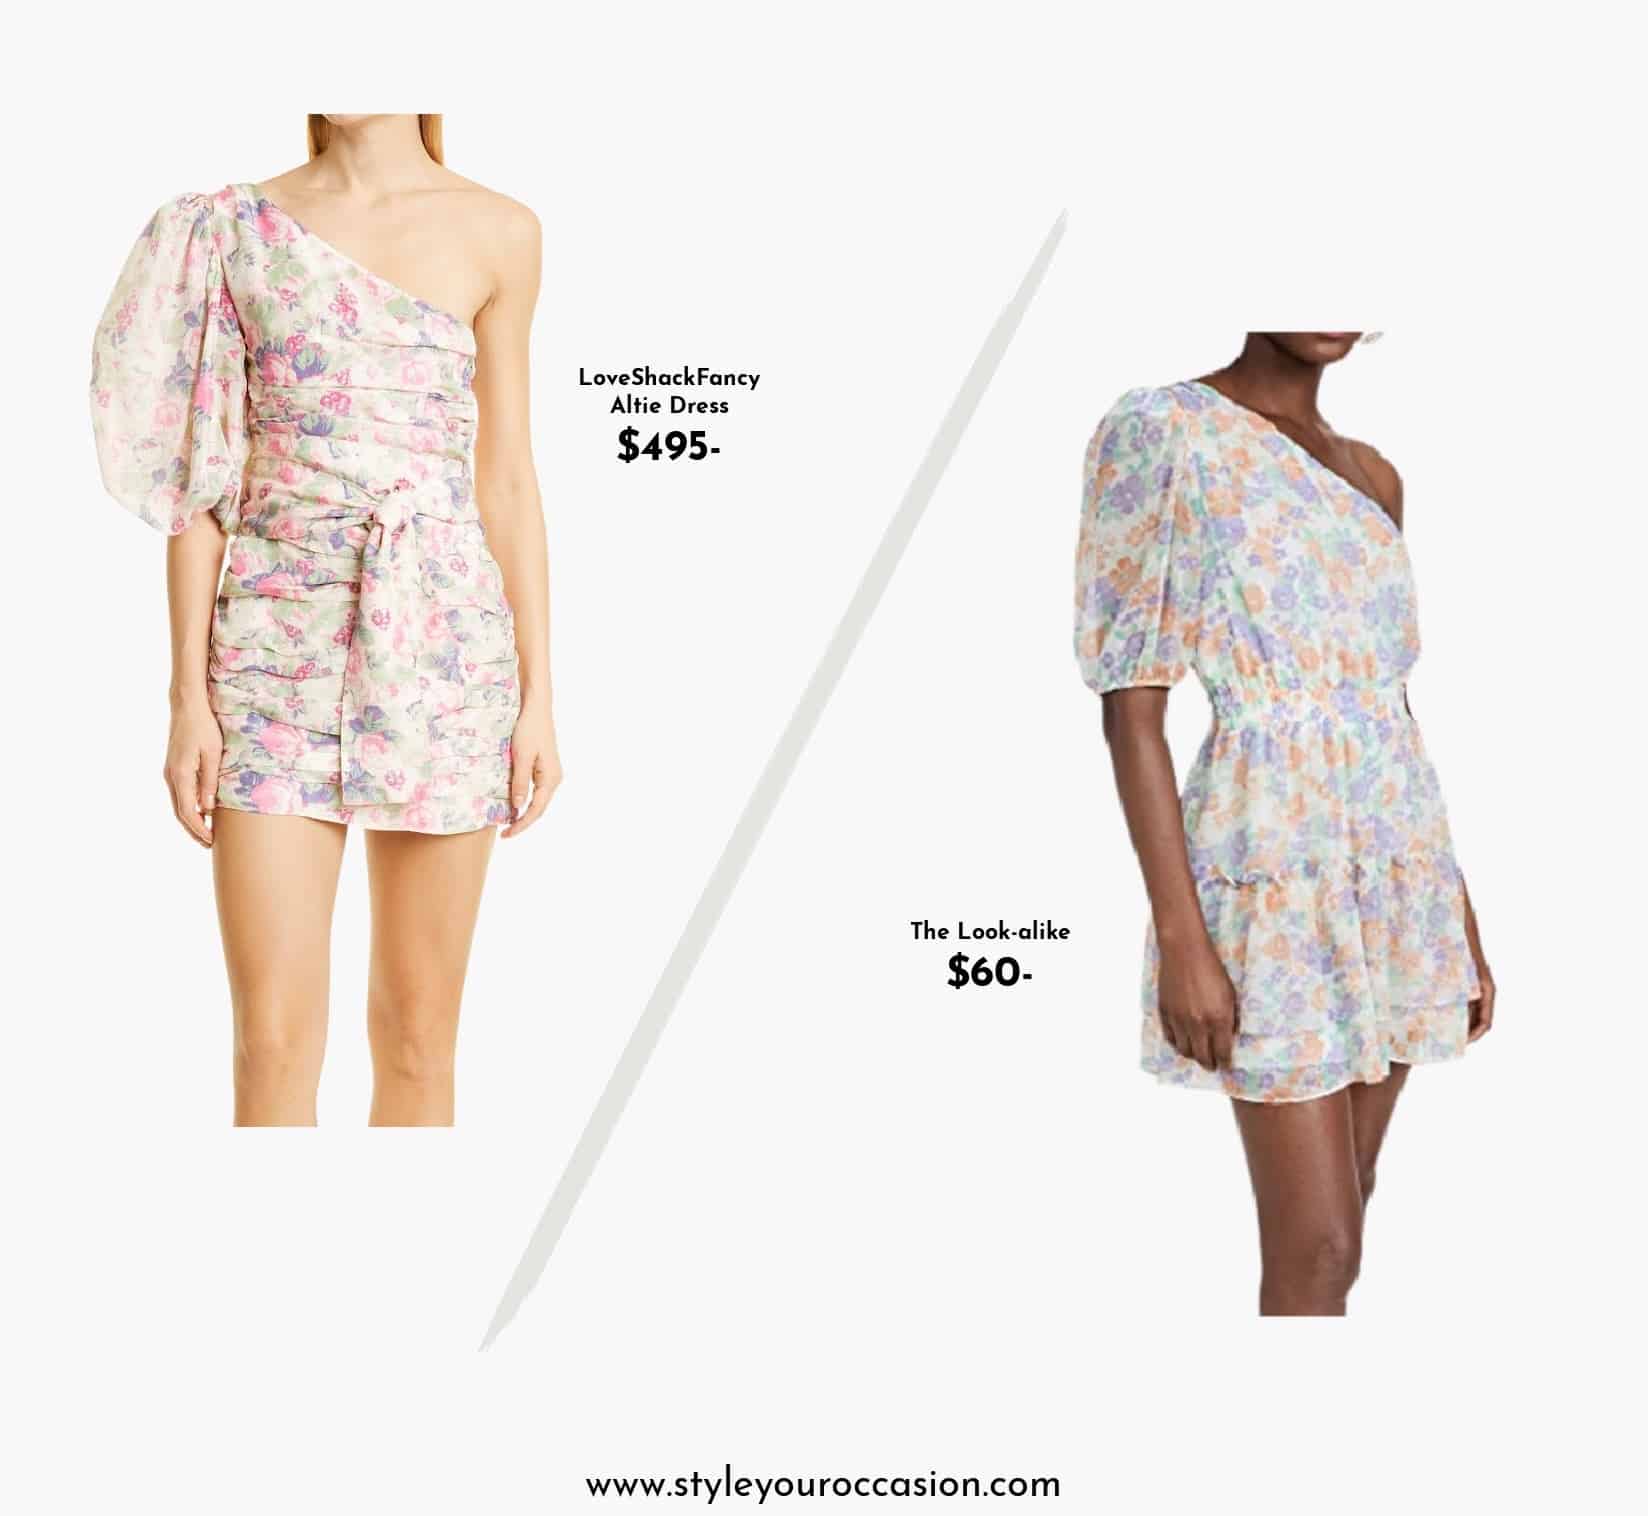 image of two floral one-shoulder mini dresses that look alike